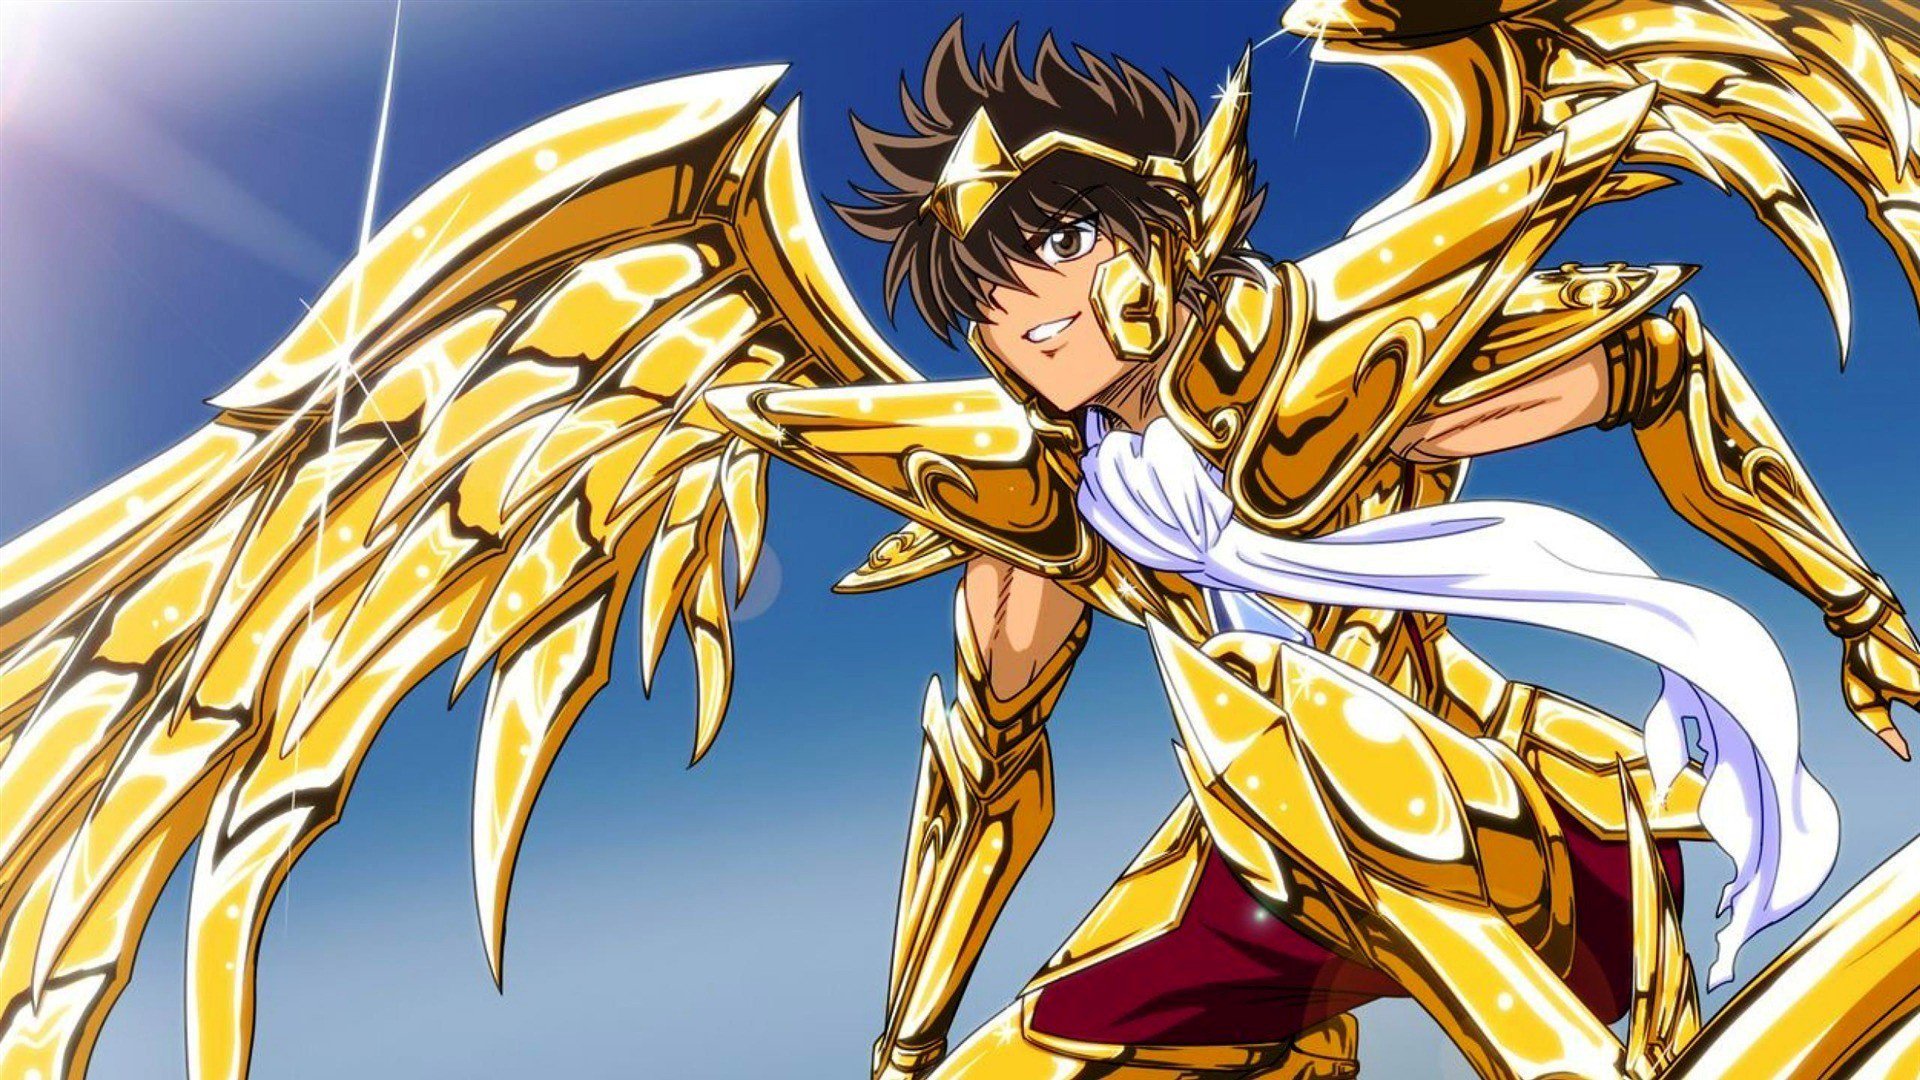 Saint Seiya Hd Wallpaper - Saint Seiya , HD Wallpaper & Backgrounds